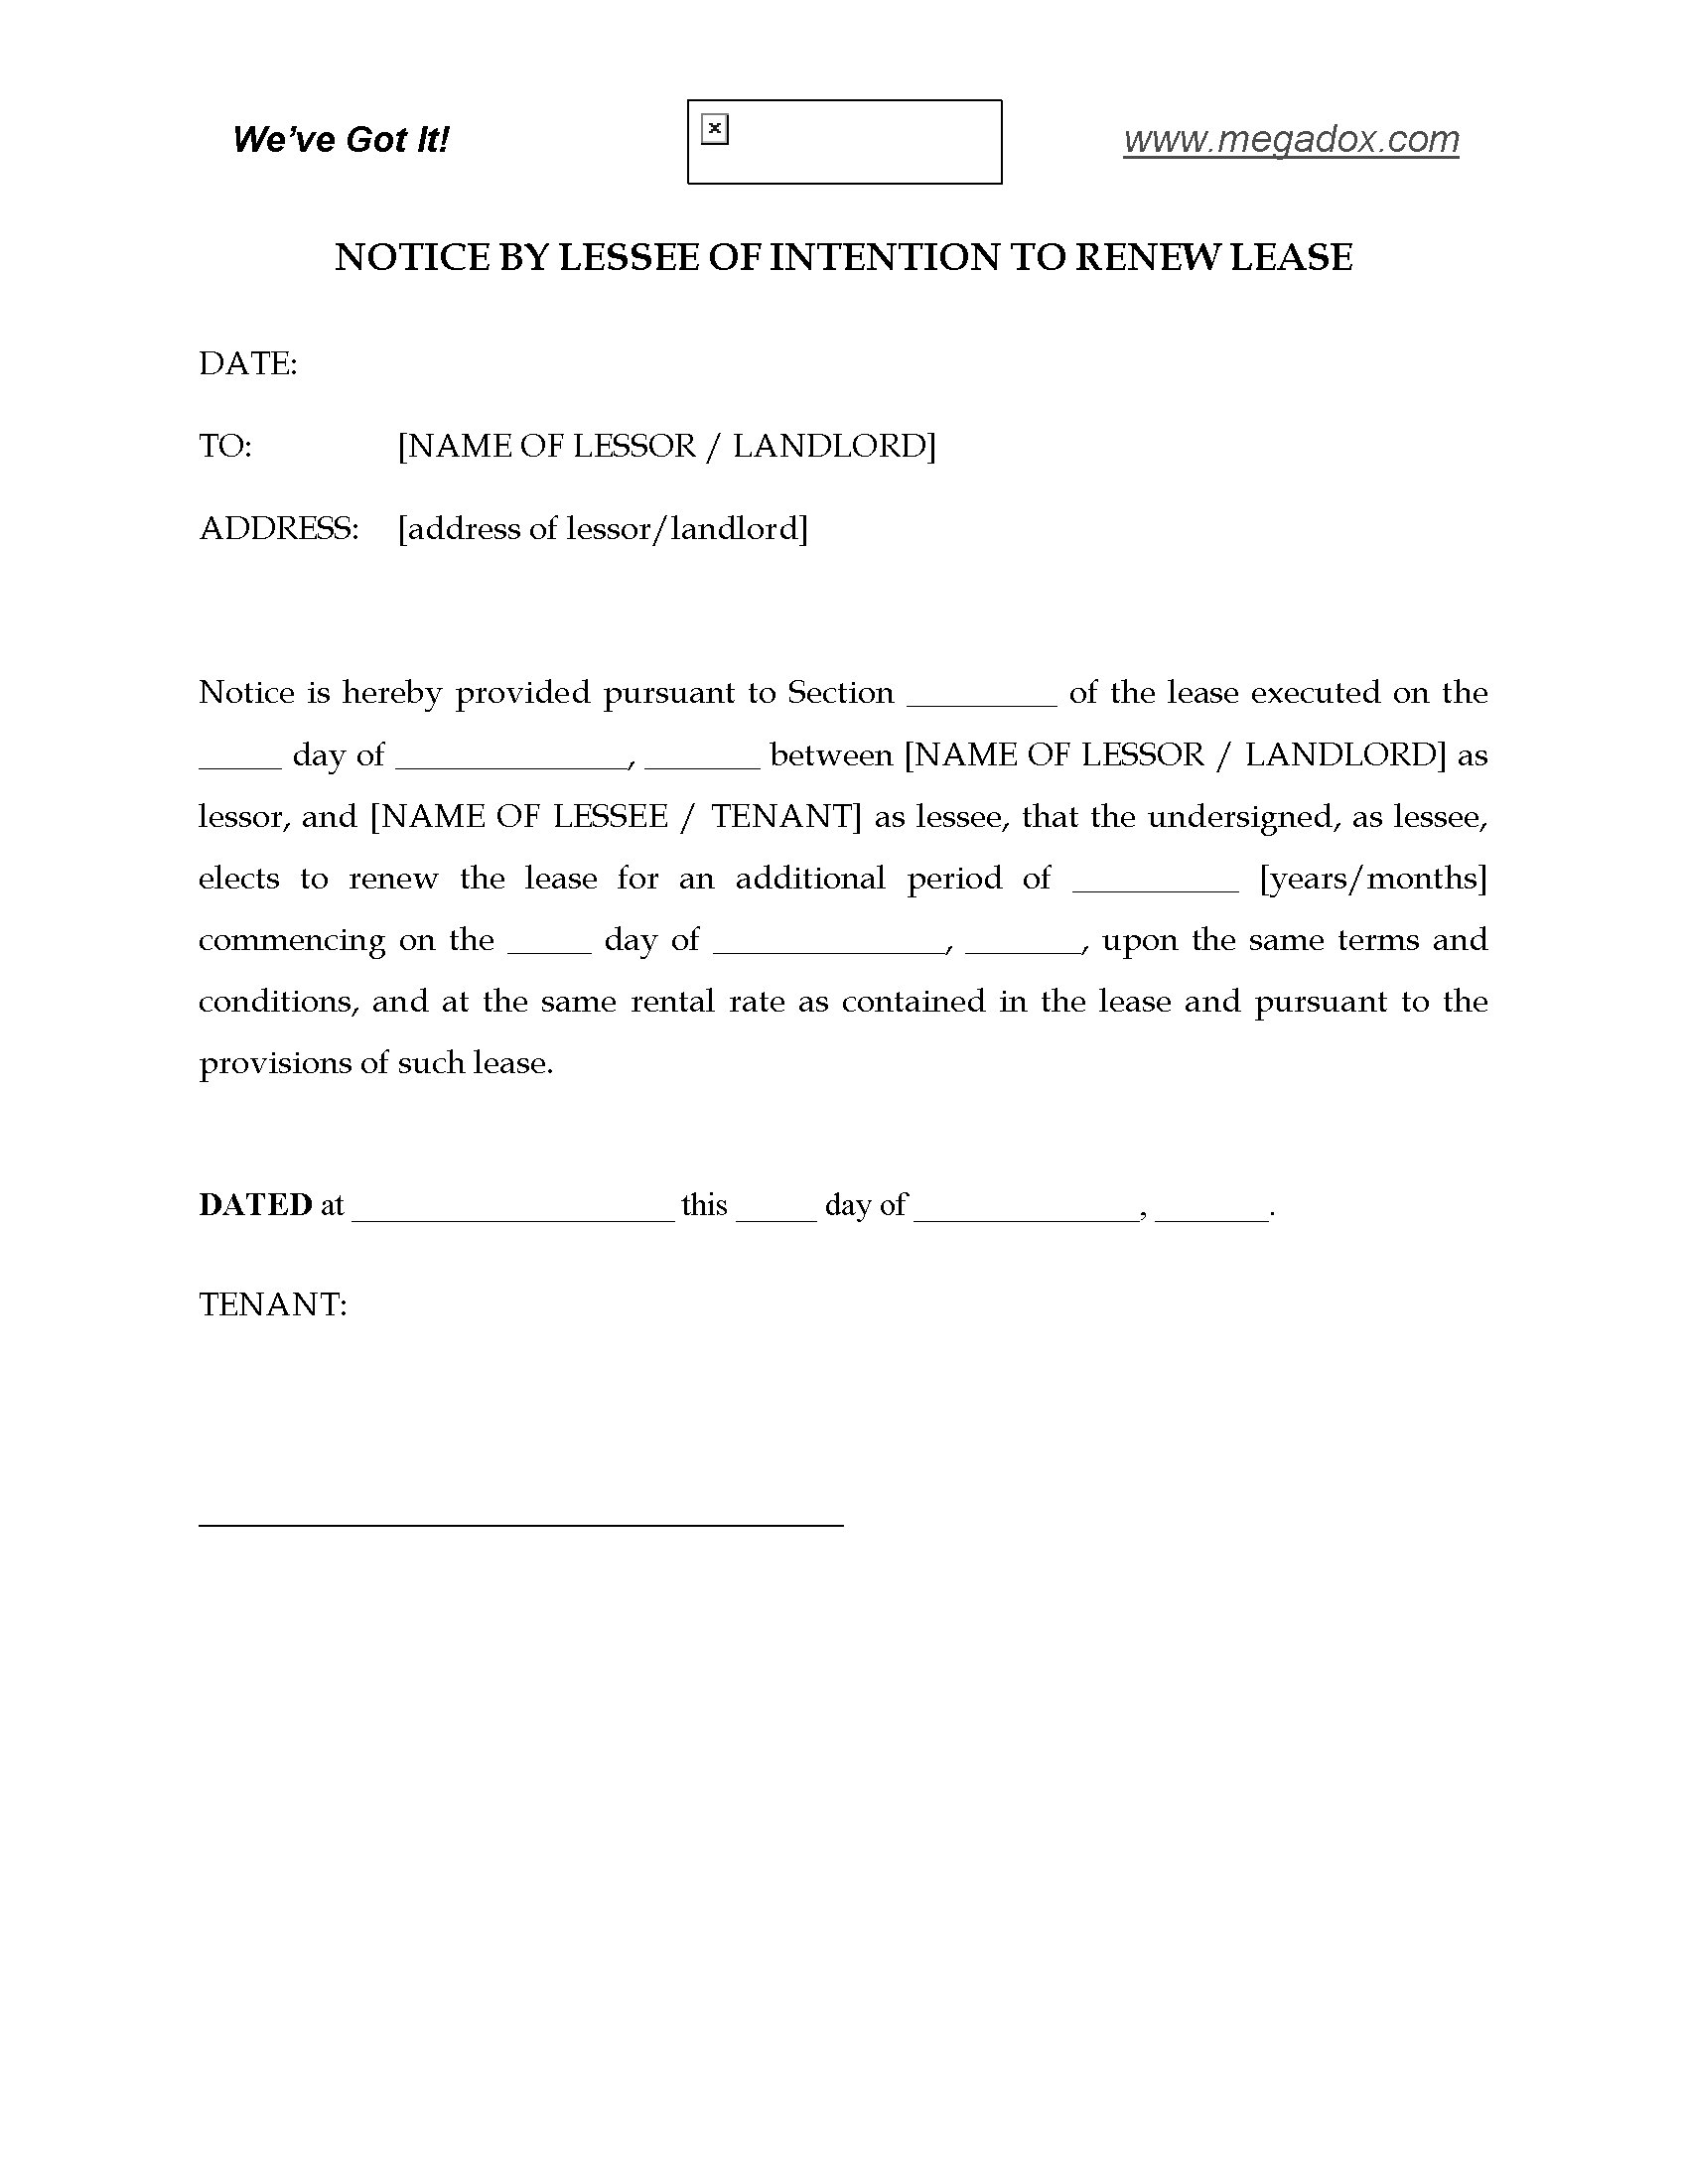 Notice by Lessee of Intention to Renew Lease | Legal Forms ...